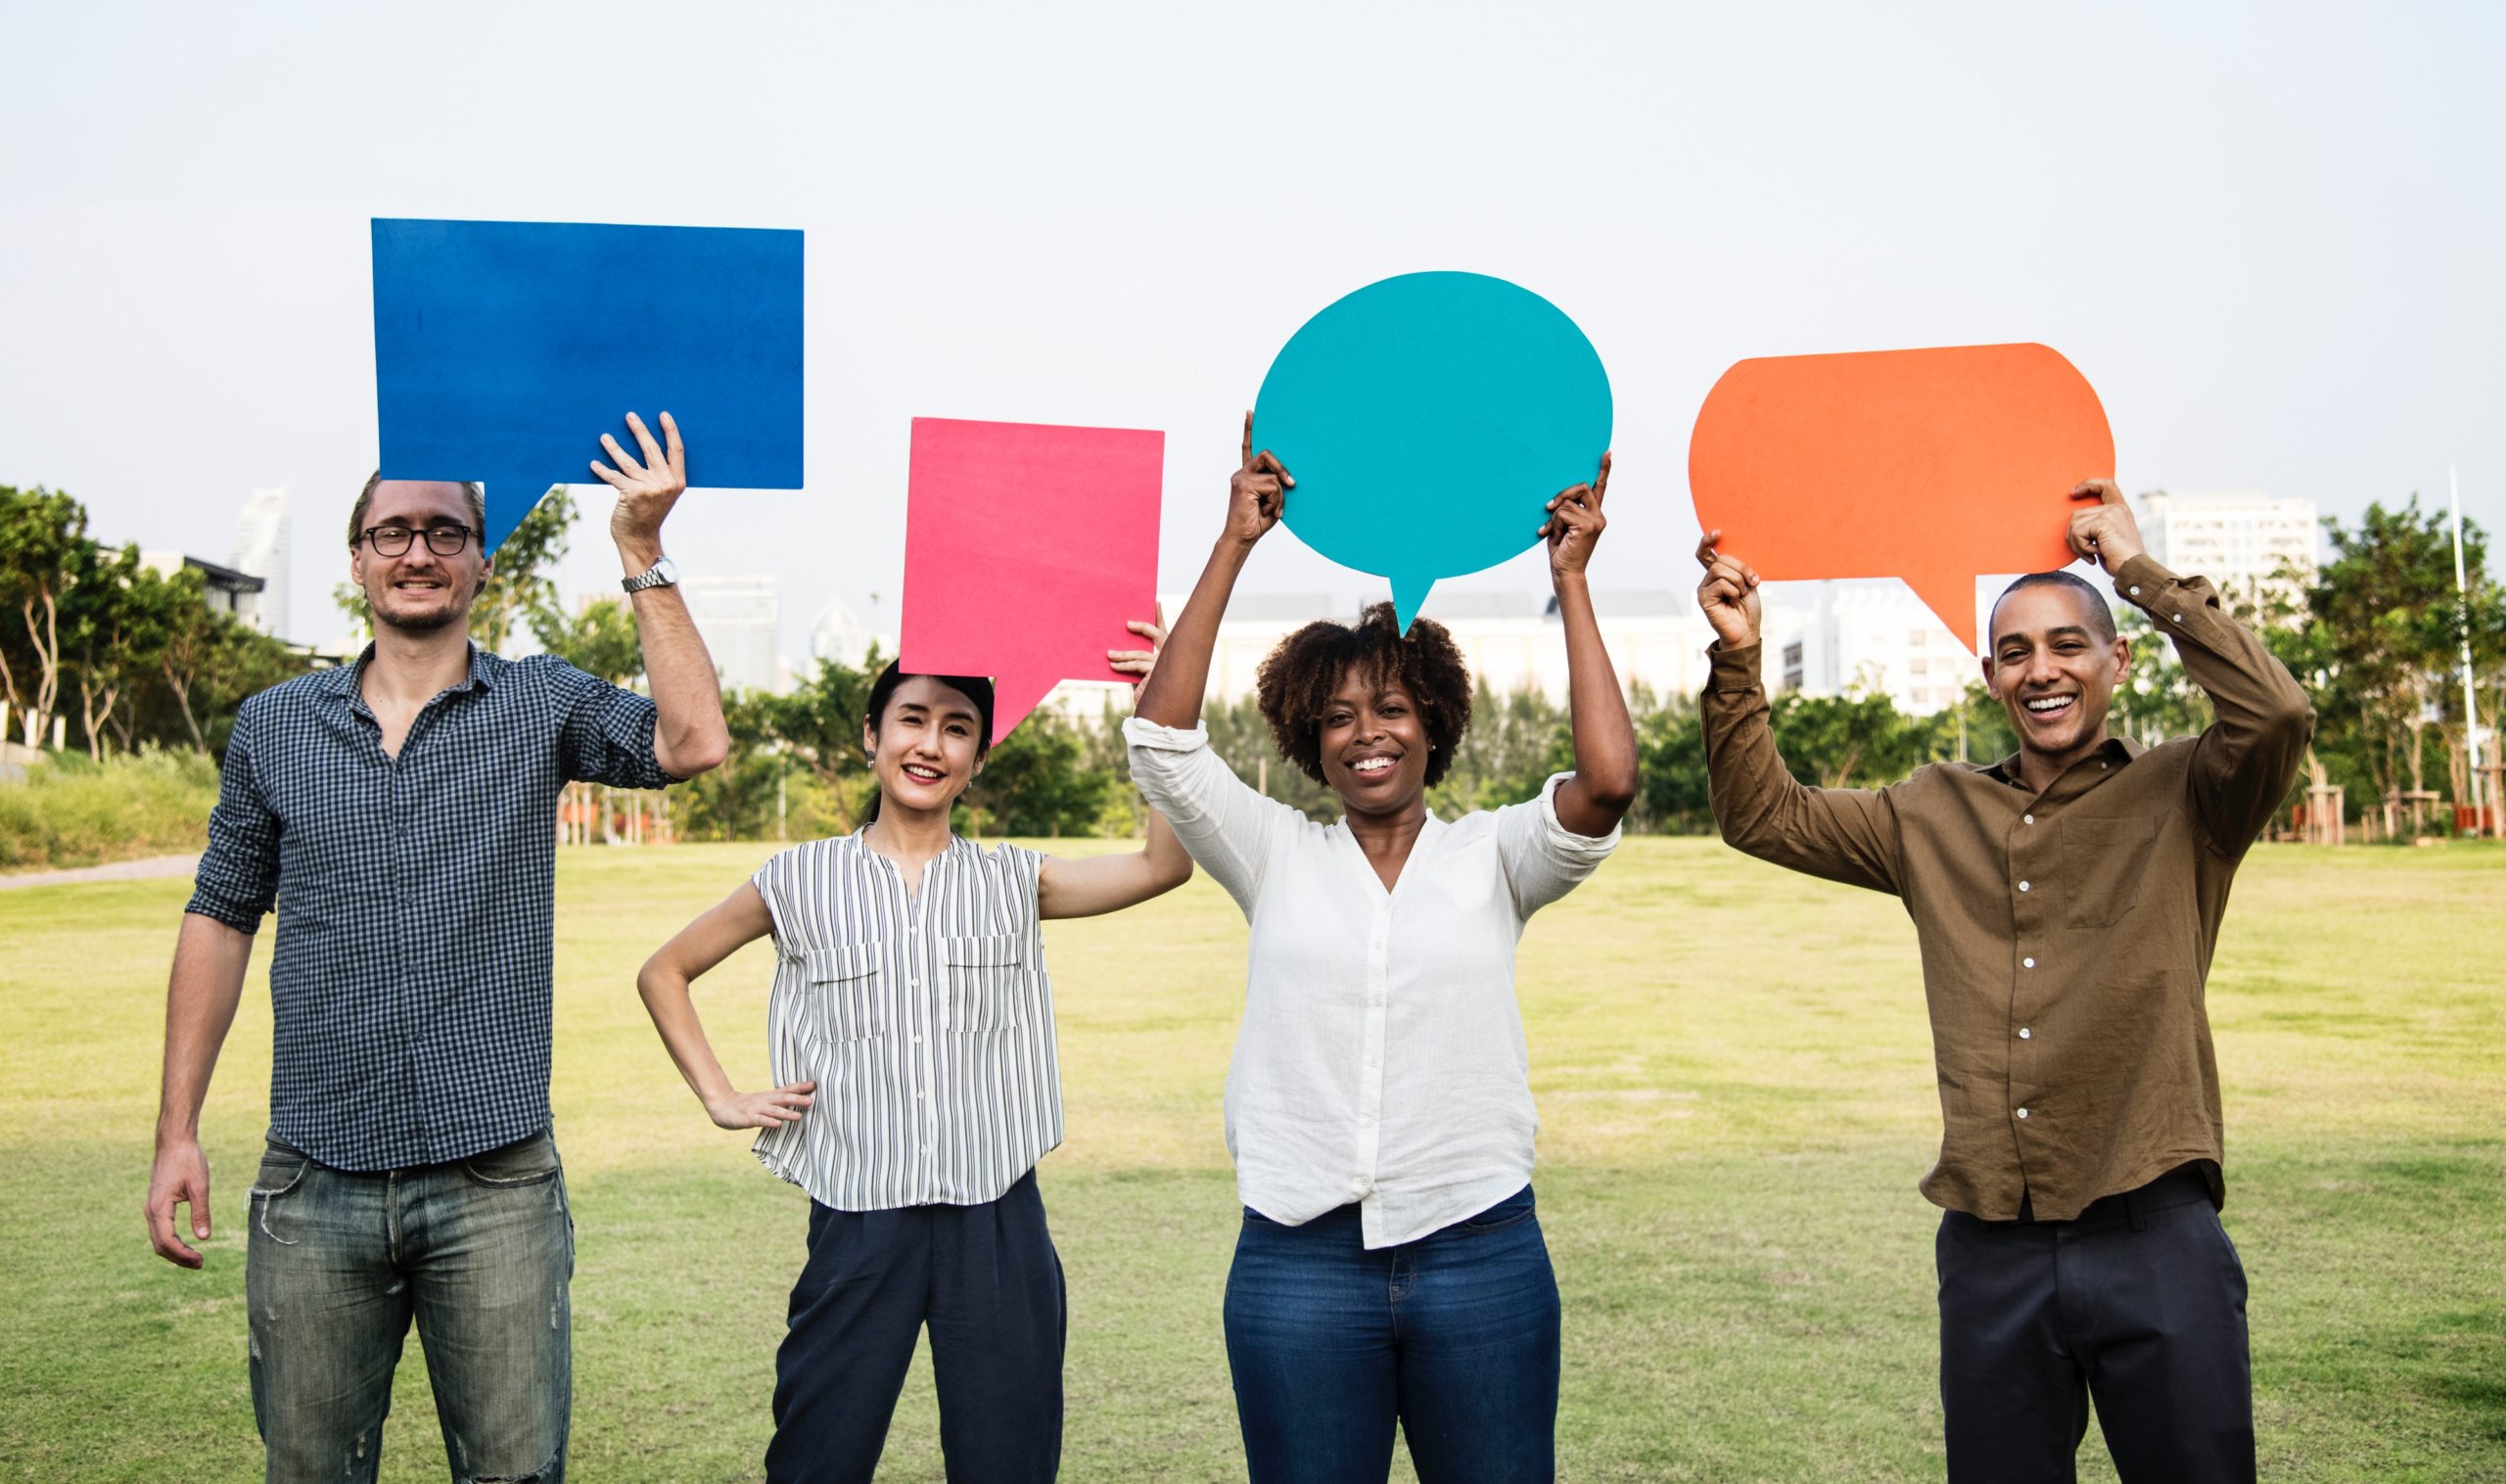 4 people holding bright coloured speech bubbles